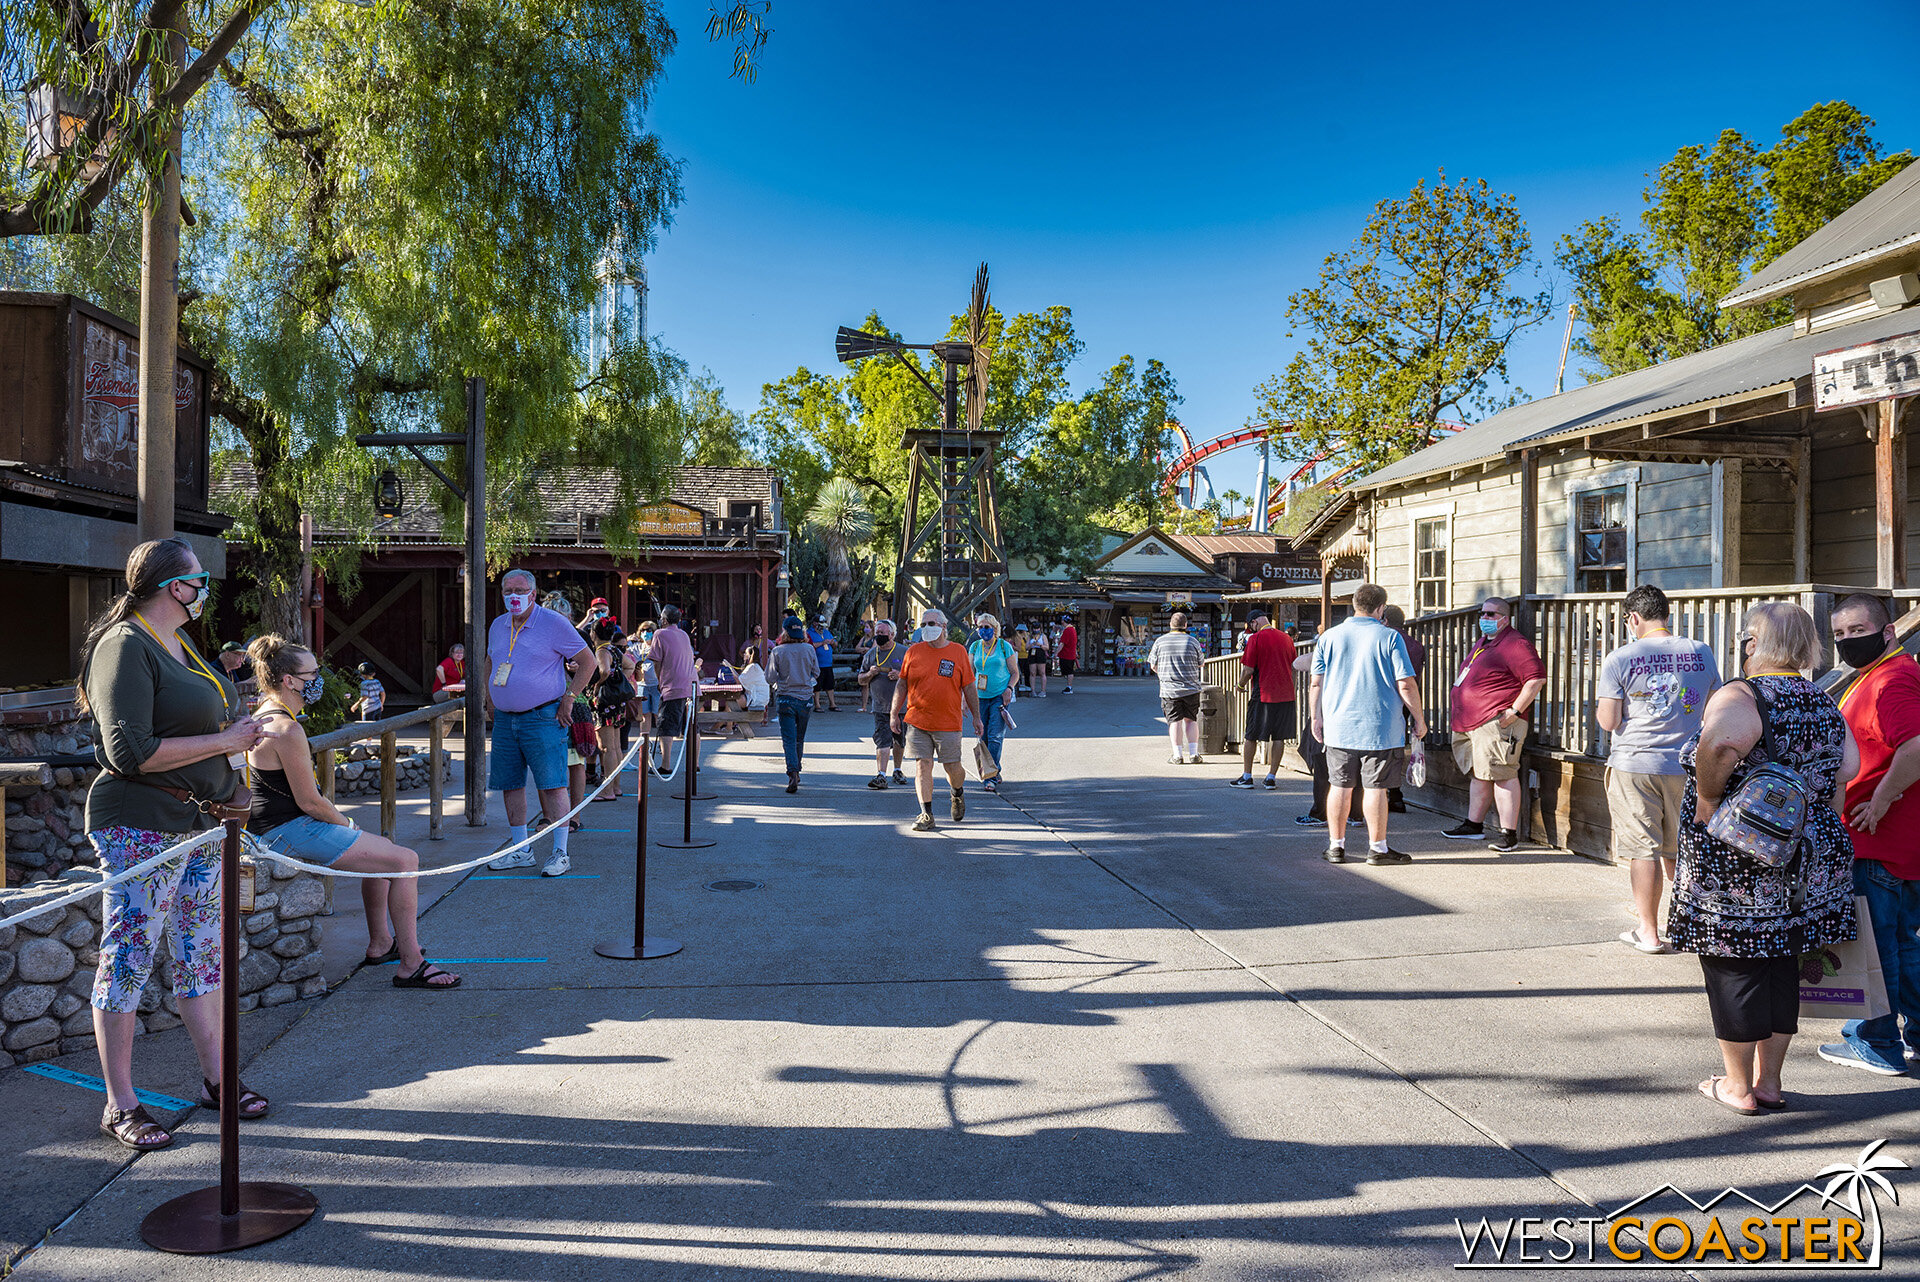  Looking back at Ghost Town Grub and Fireman’s BBQ lines. 